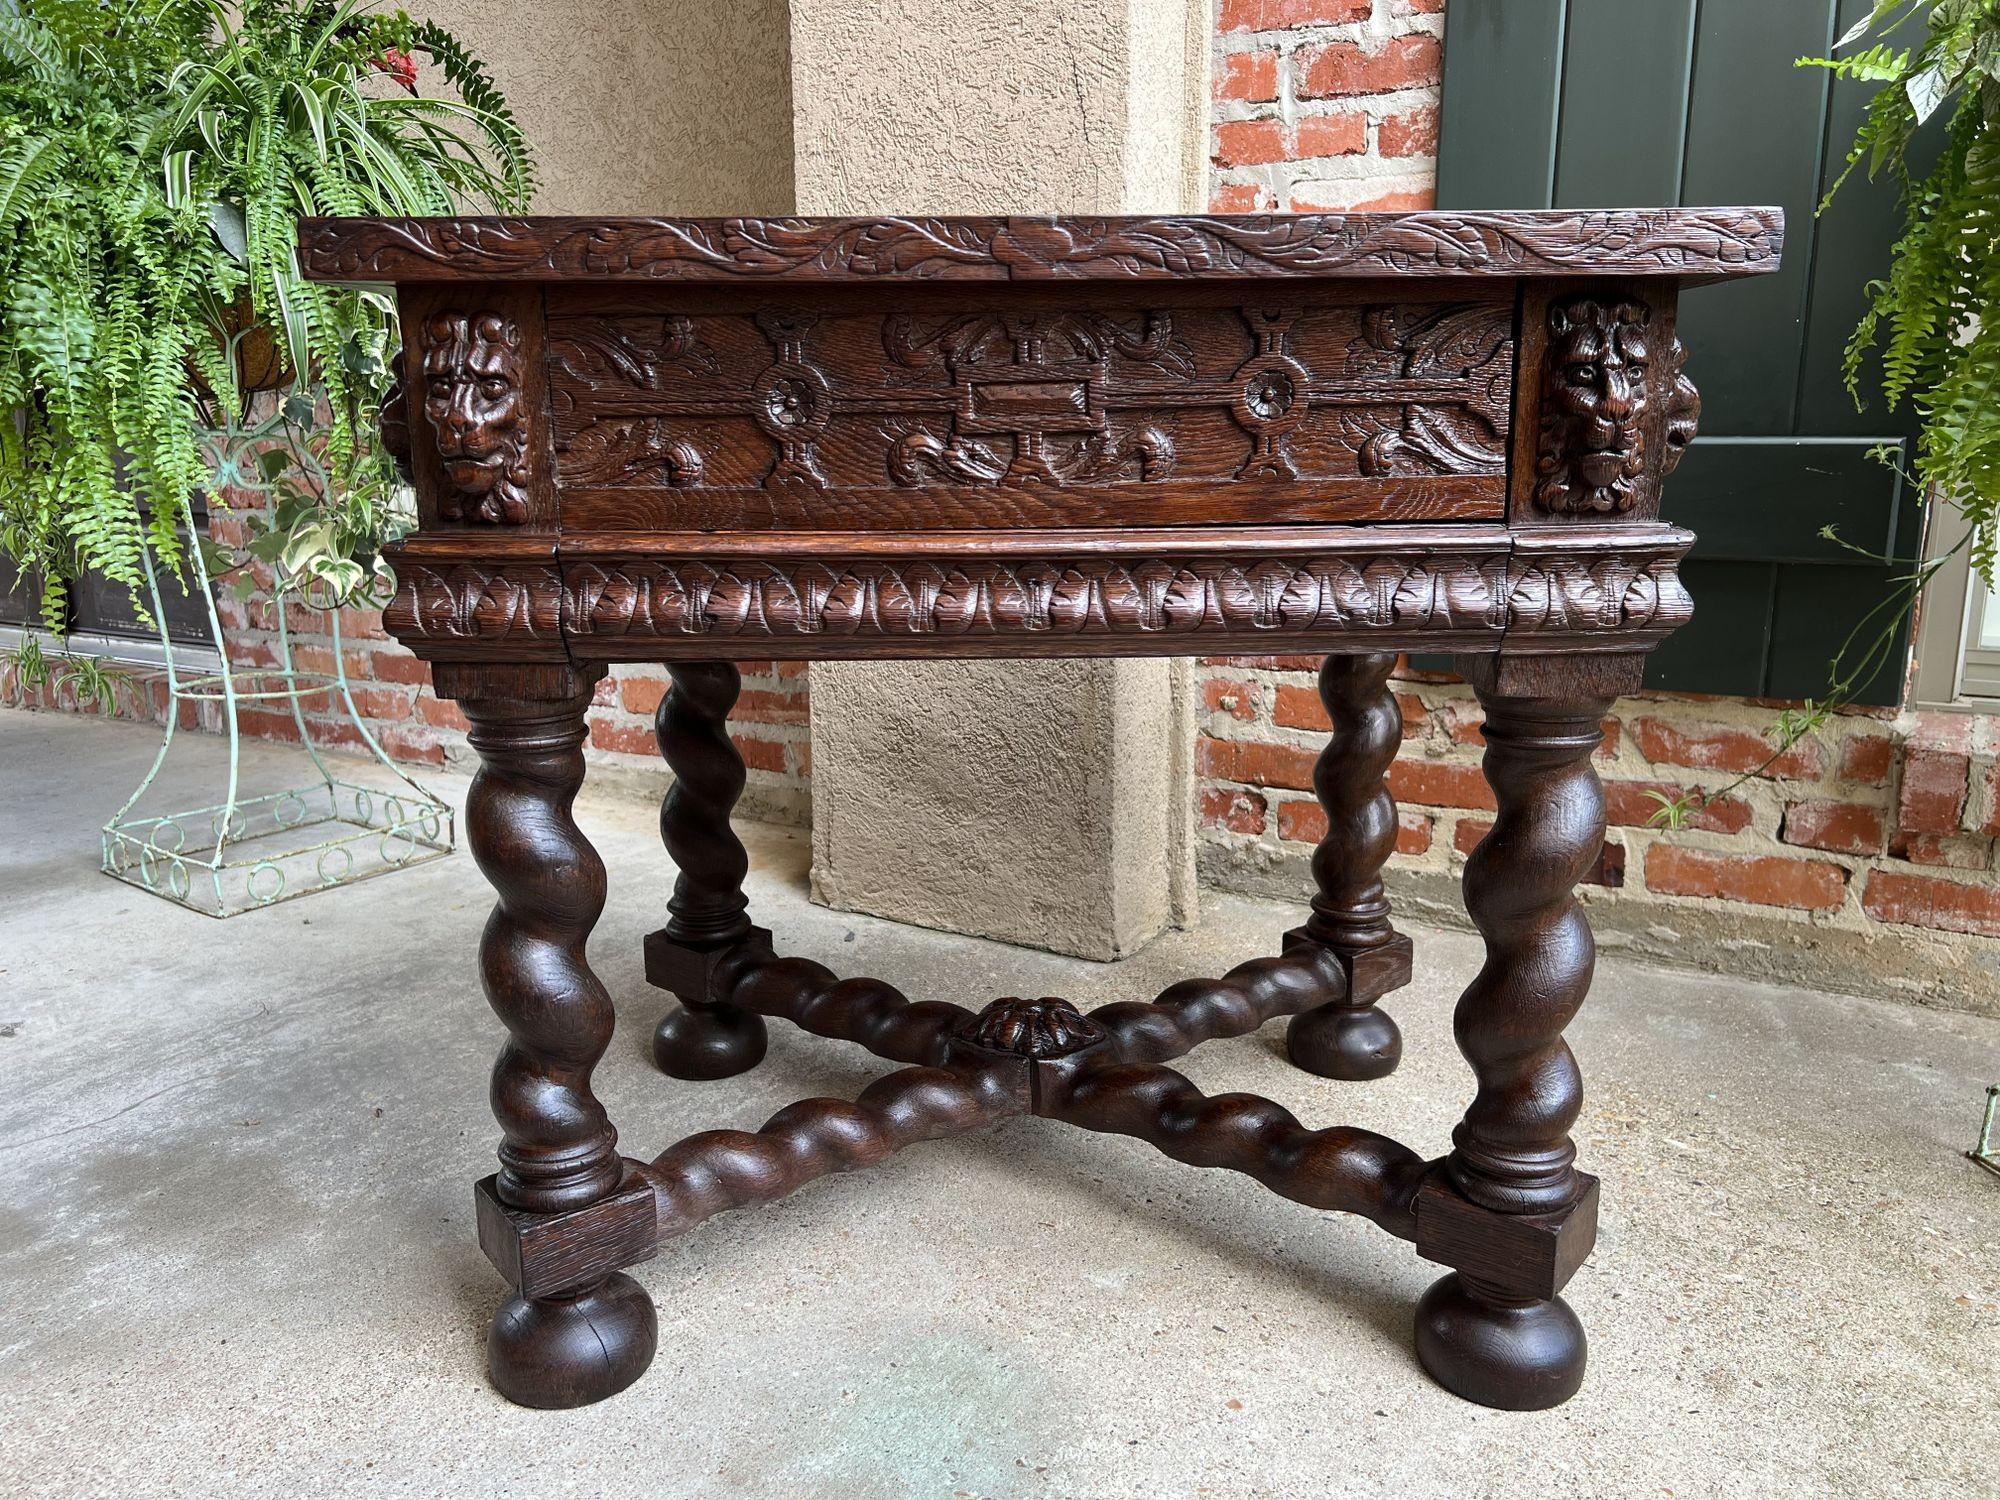 19th century antique French square sofa table carved oak barley twist Louis XIII.
 
Direct from France, a substantial and heavy antique French square side/sofa table, with impressive details.
 
Large hand carved edge top over the oversized, wide